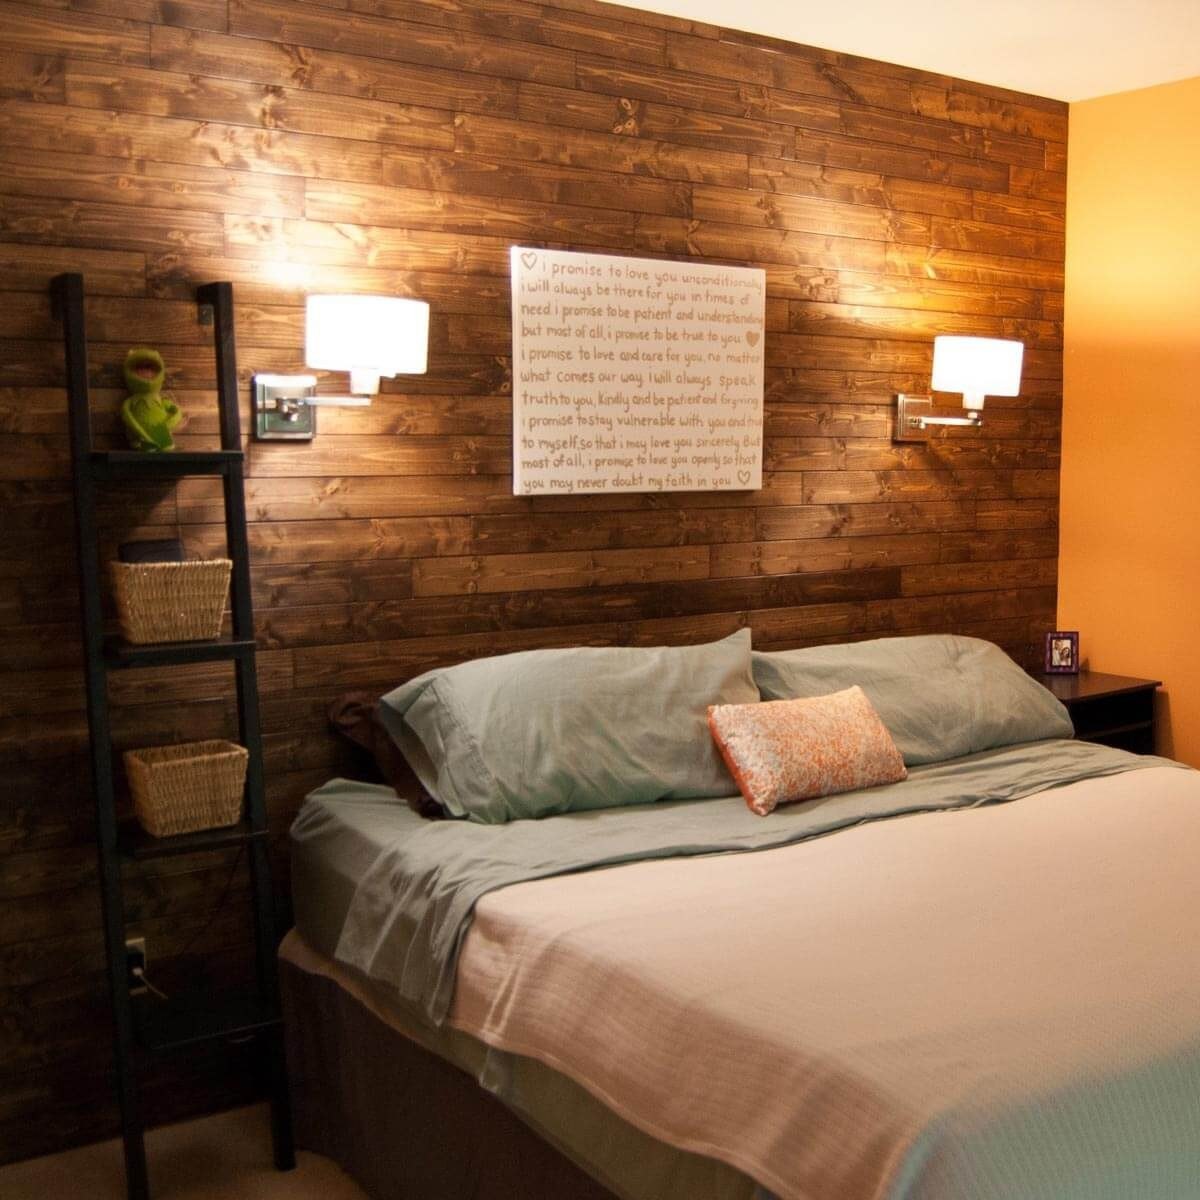 Wall Mounted Bedroom Lights
 12 Ingenious Bedroom Furniture Ideas — The Family Handyman